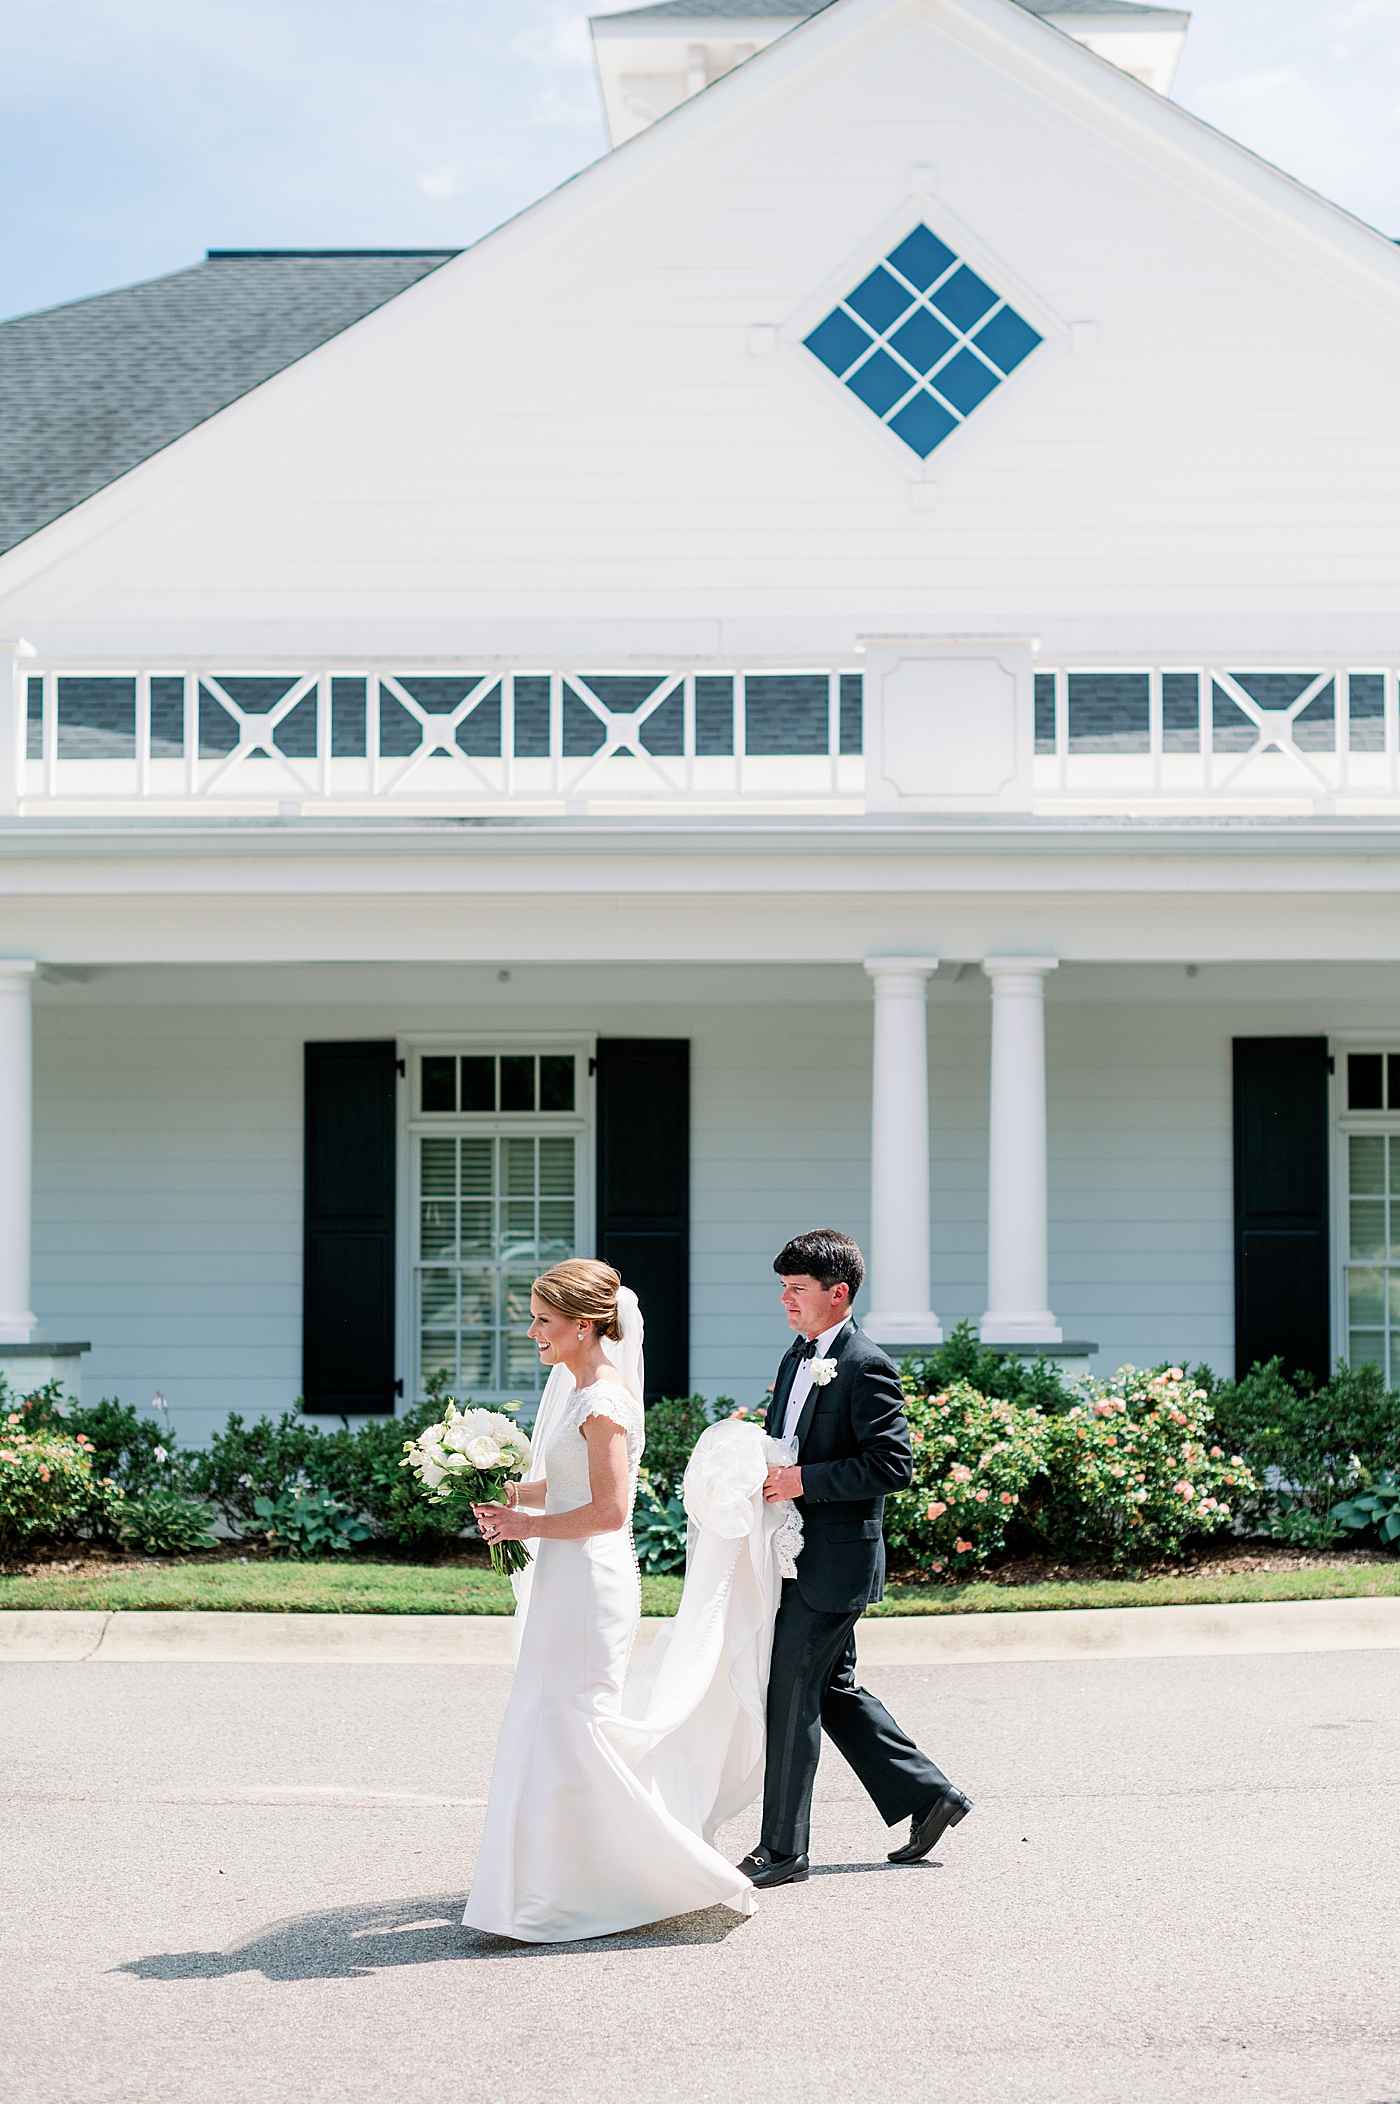 Bride and groom walking toward their wedding party during their Simple Southern Country Club Wedding | Image by Annie Laura Photo